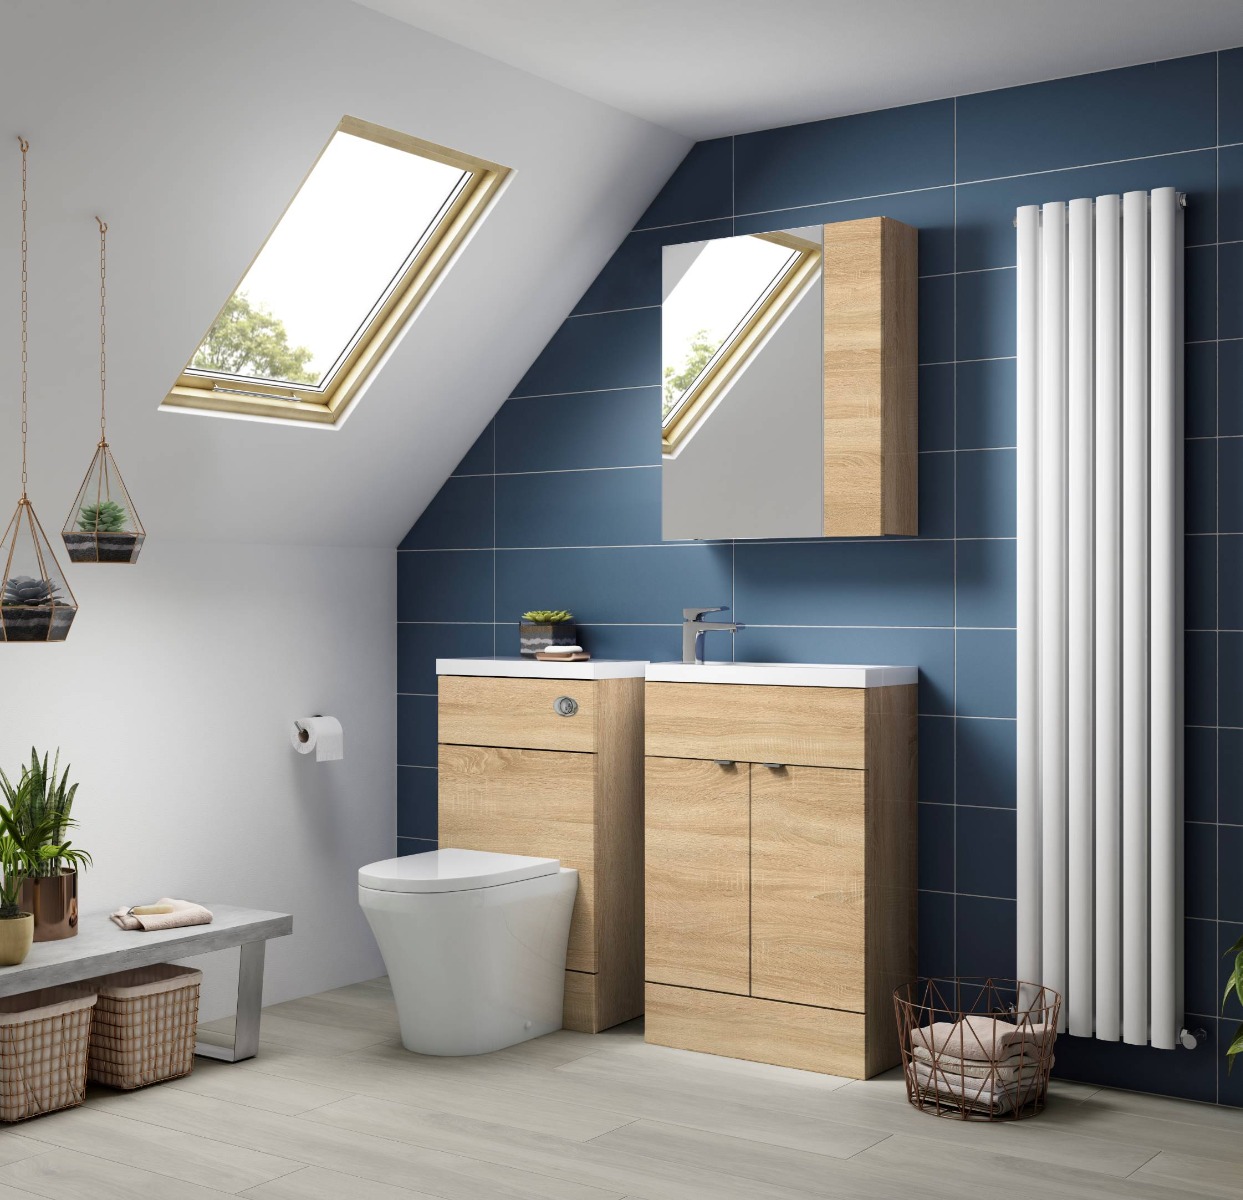 large blue wall tiles with white bathroom and oak bathroom features